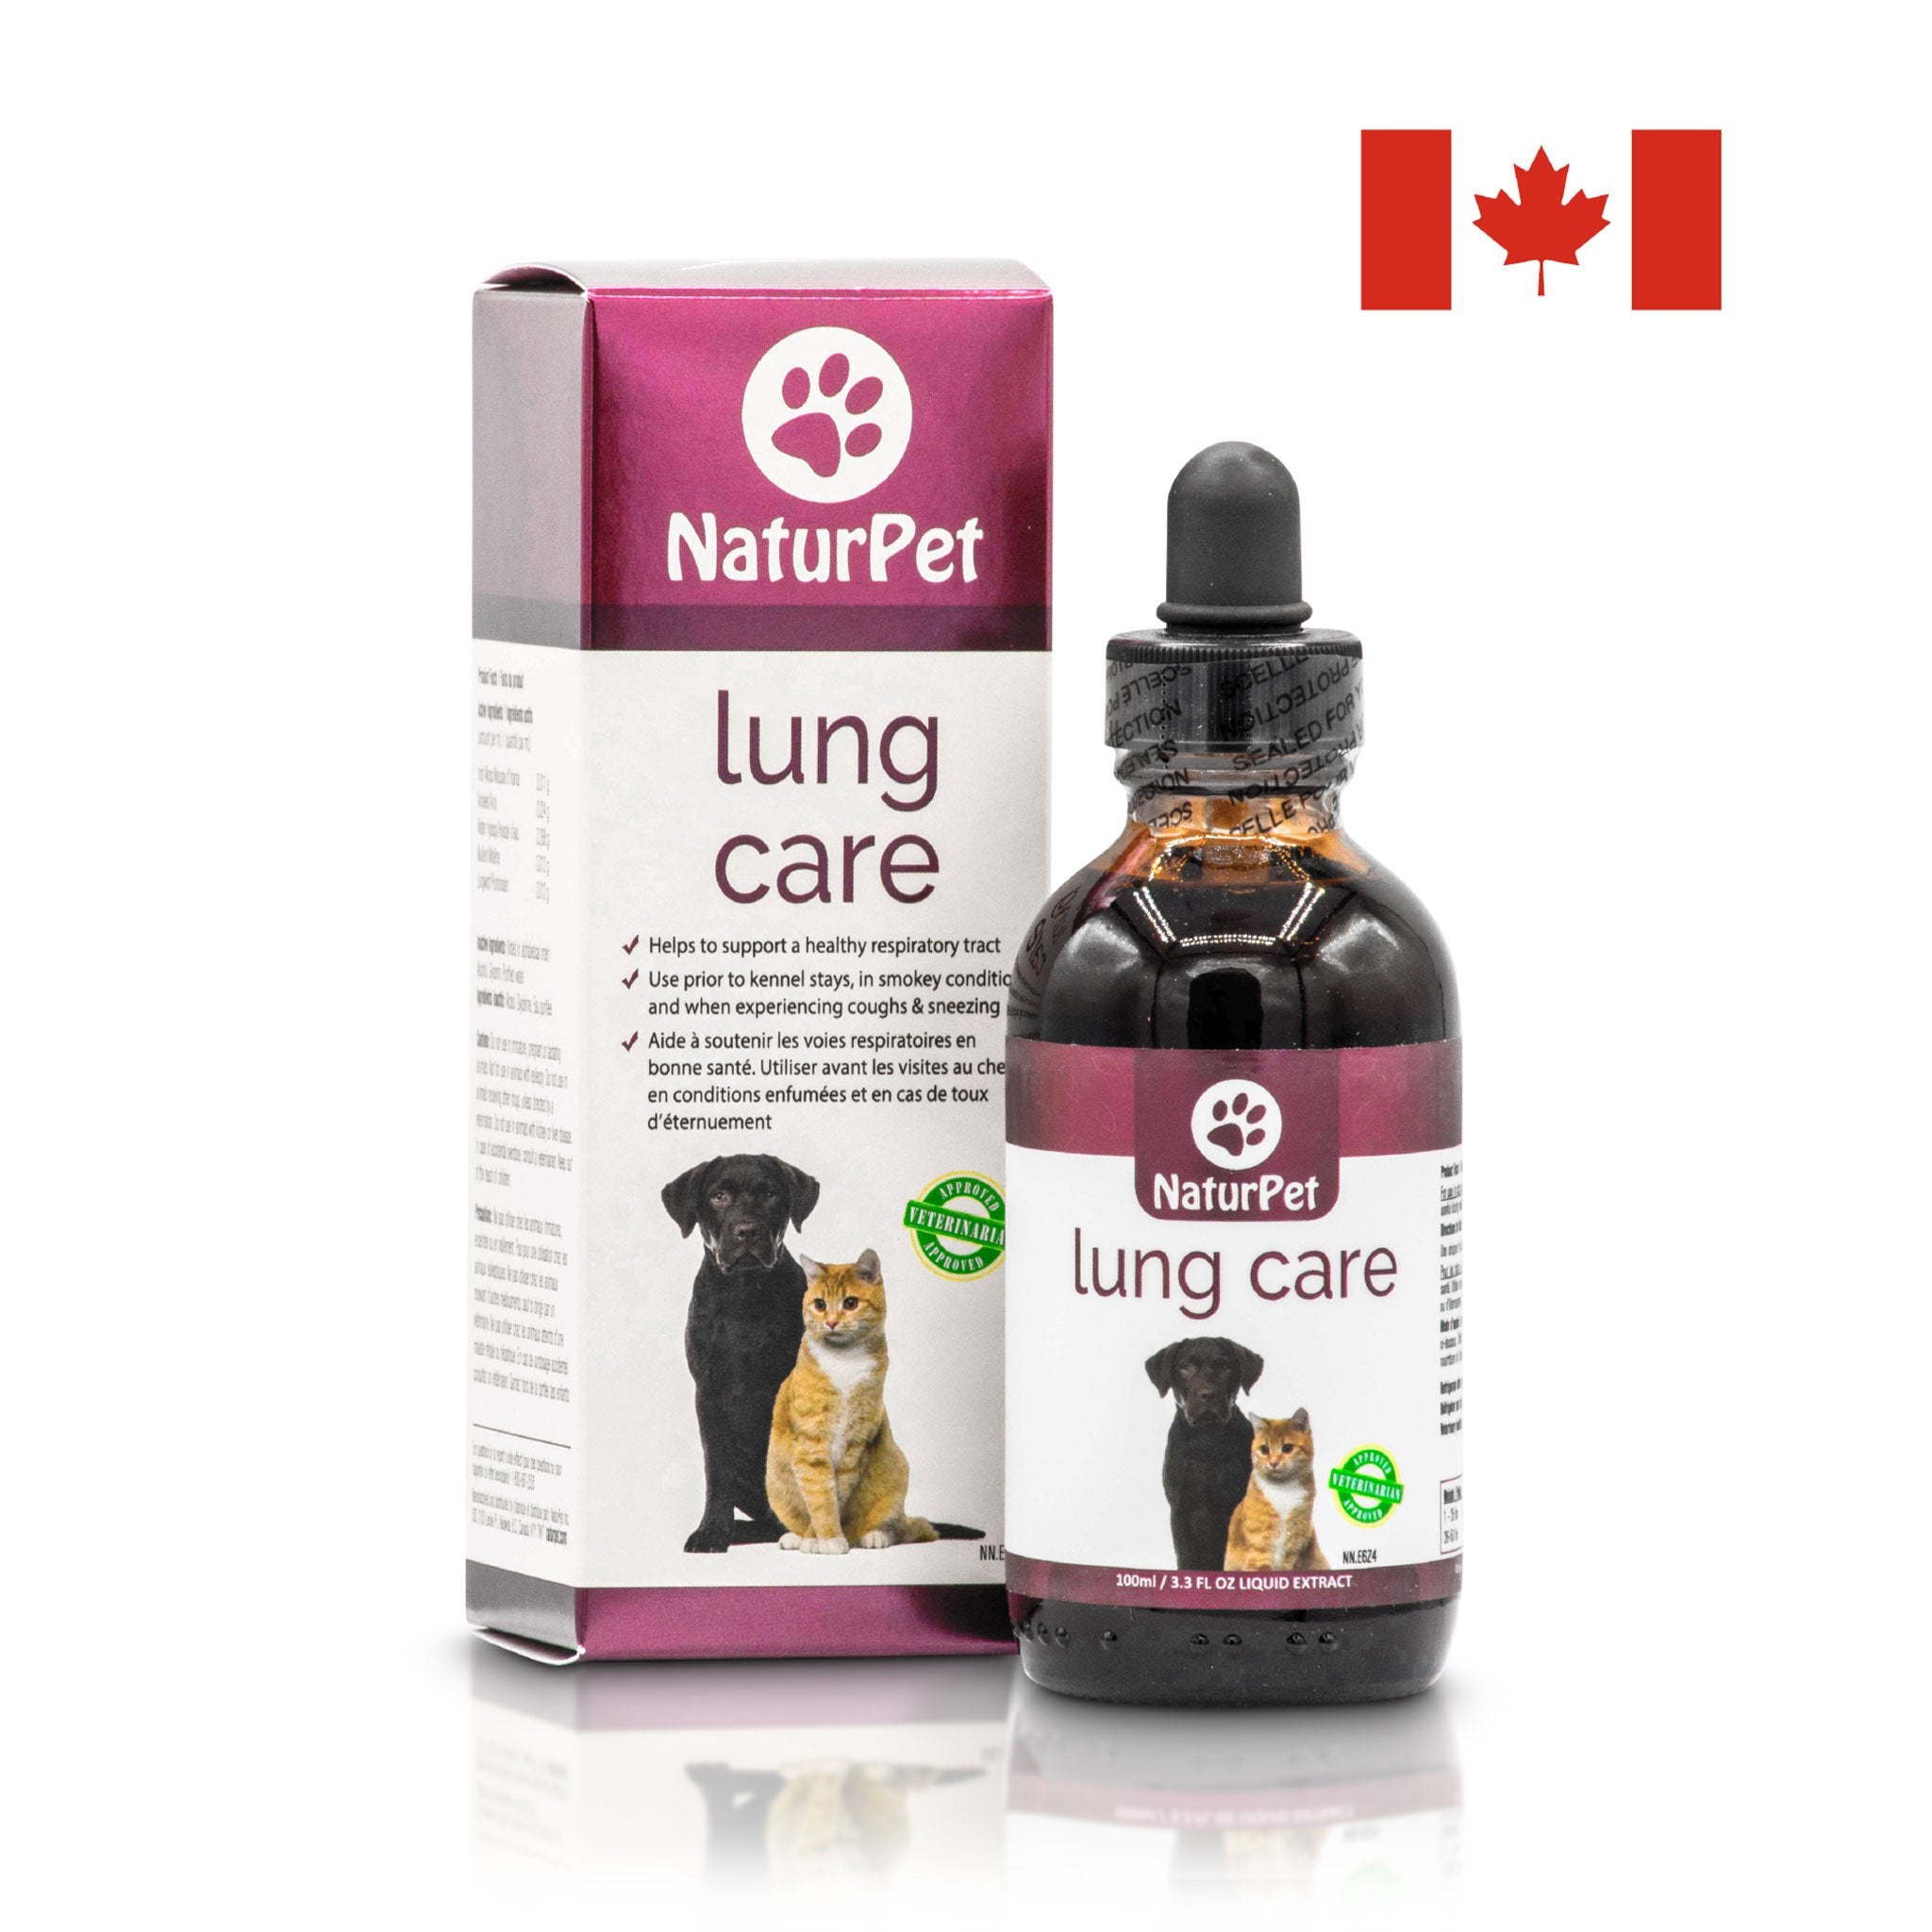 NaturPet Lung Care